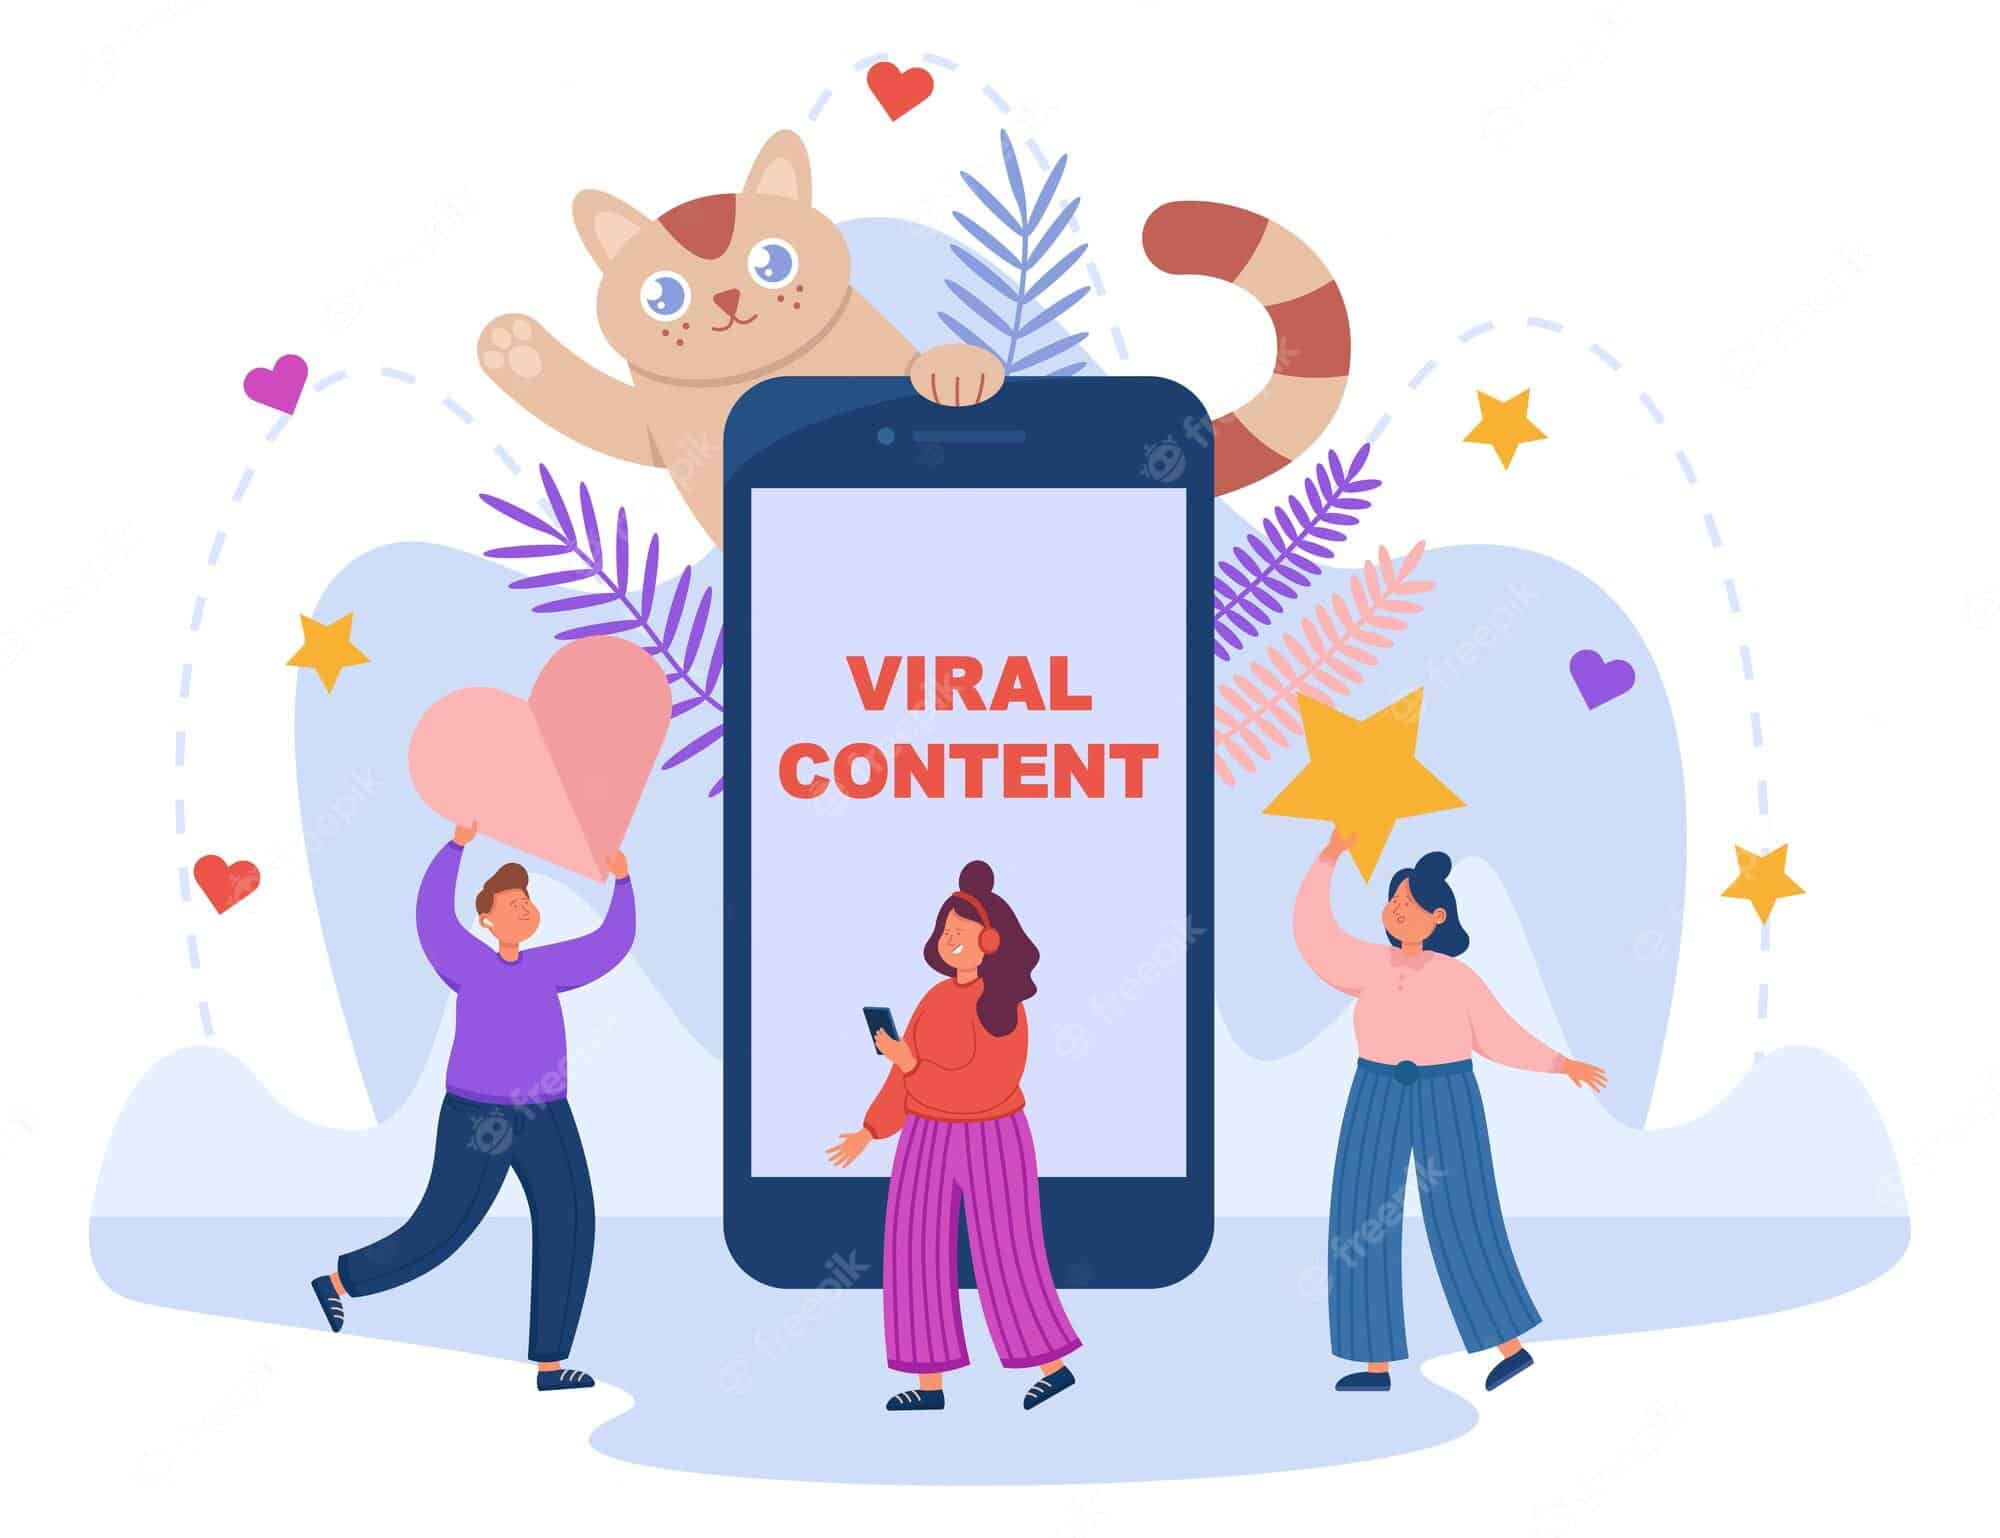 Celebrating Viral Content post that widespread